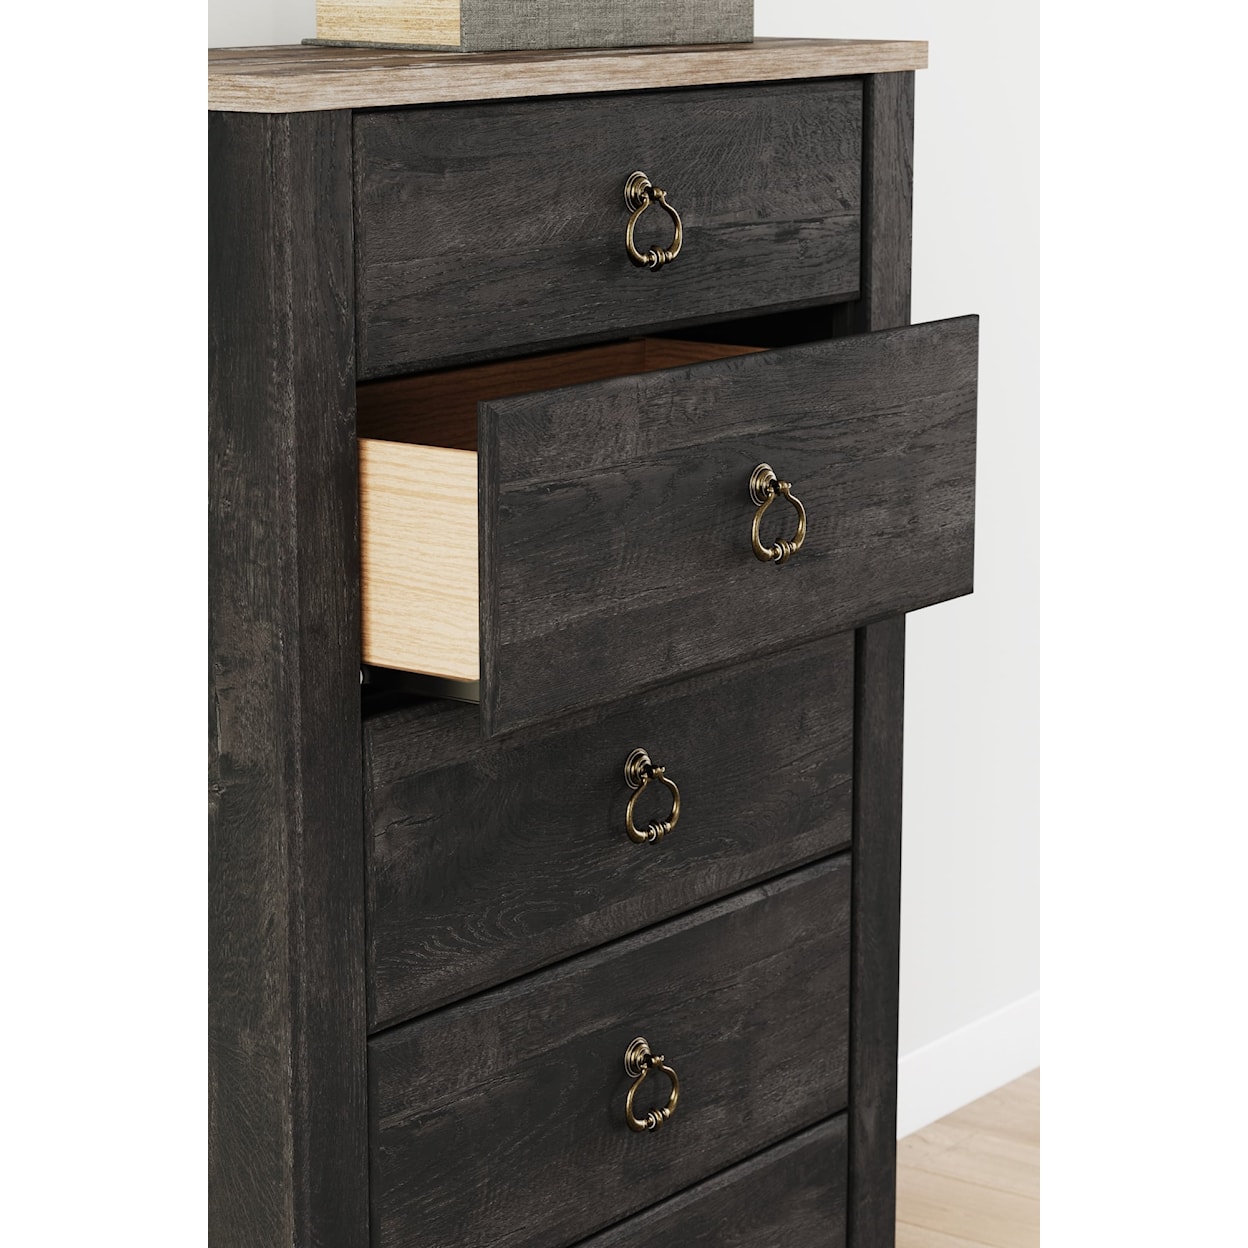 Signature Design by Ashley Furniture Nanforth Bedroom Chest